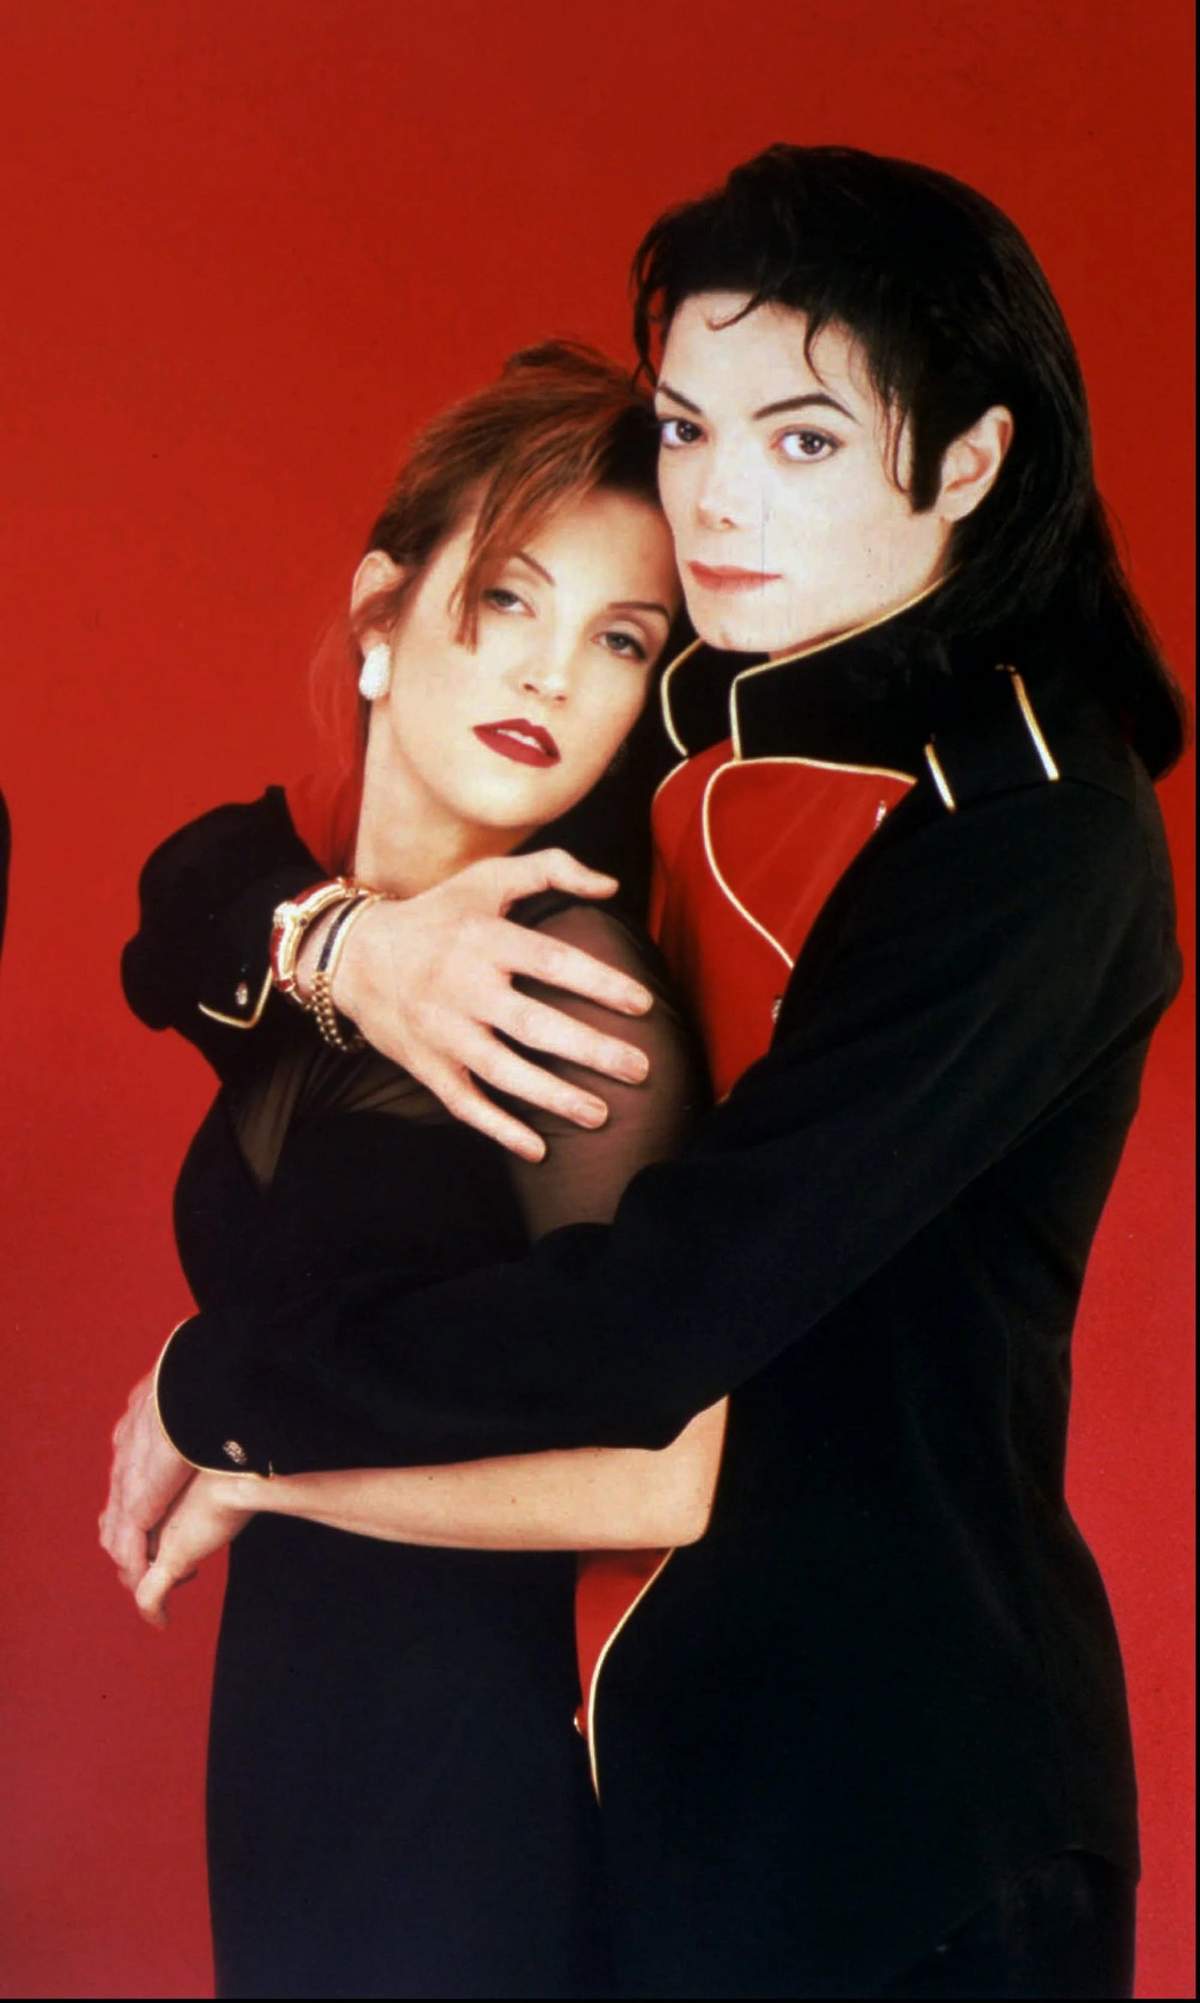 Its just unbelievable how Lisa Marie Presley lost all the Elvis millions